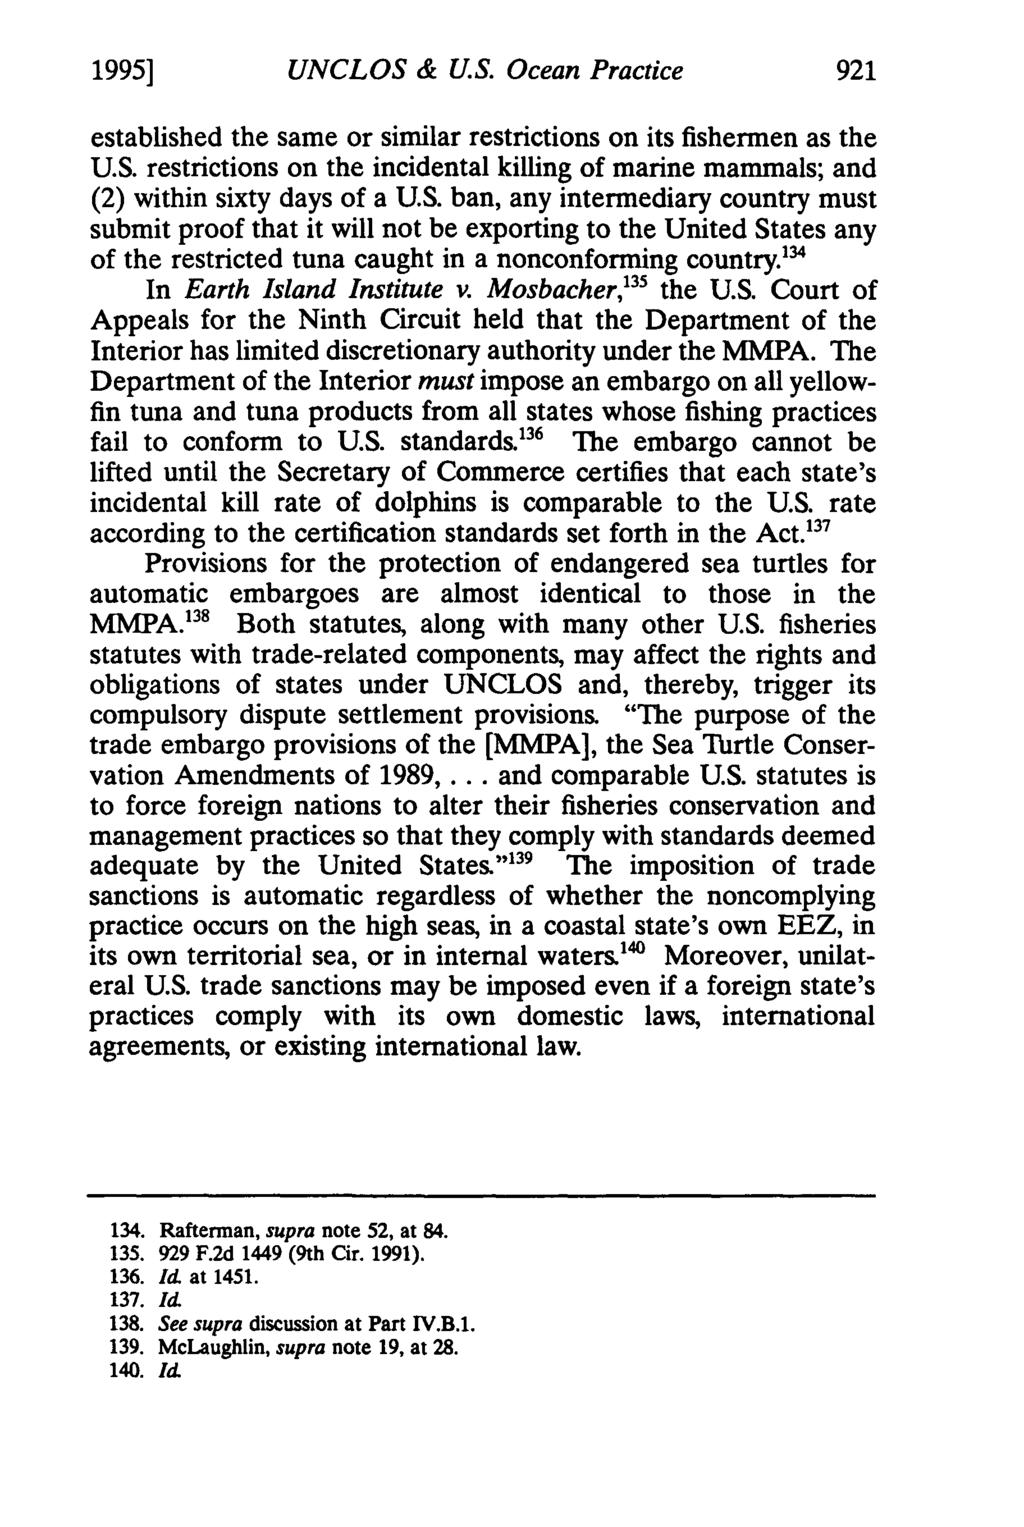 1995] UNCLOS & U.S. Ocean Practice established the same or similar restrictions on its fishermen as the U.S. restrictions on the incidental killing of marine mammals; and (2) within sixty days of a U.